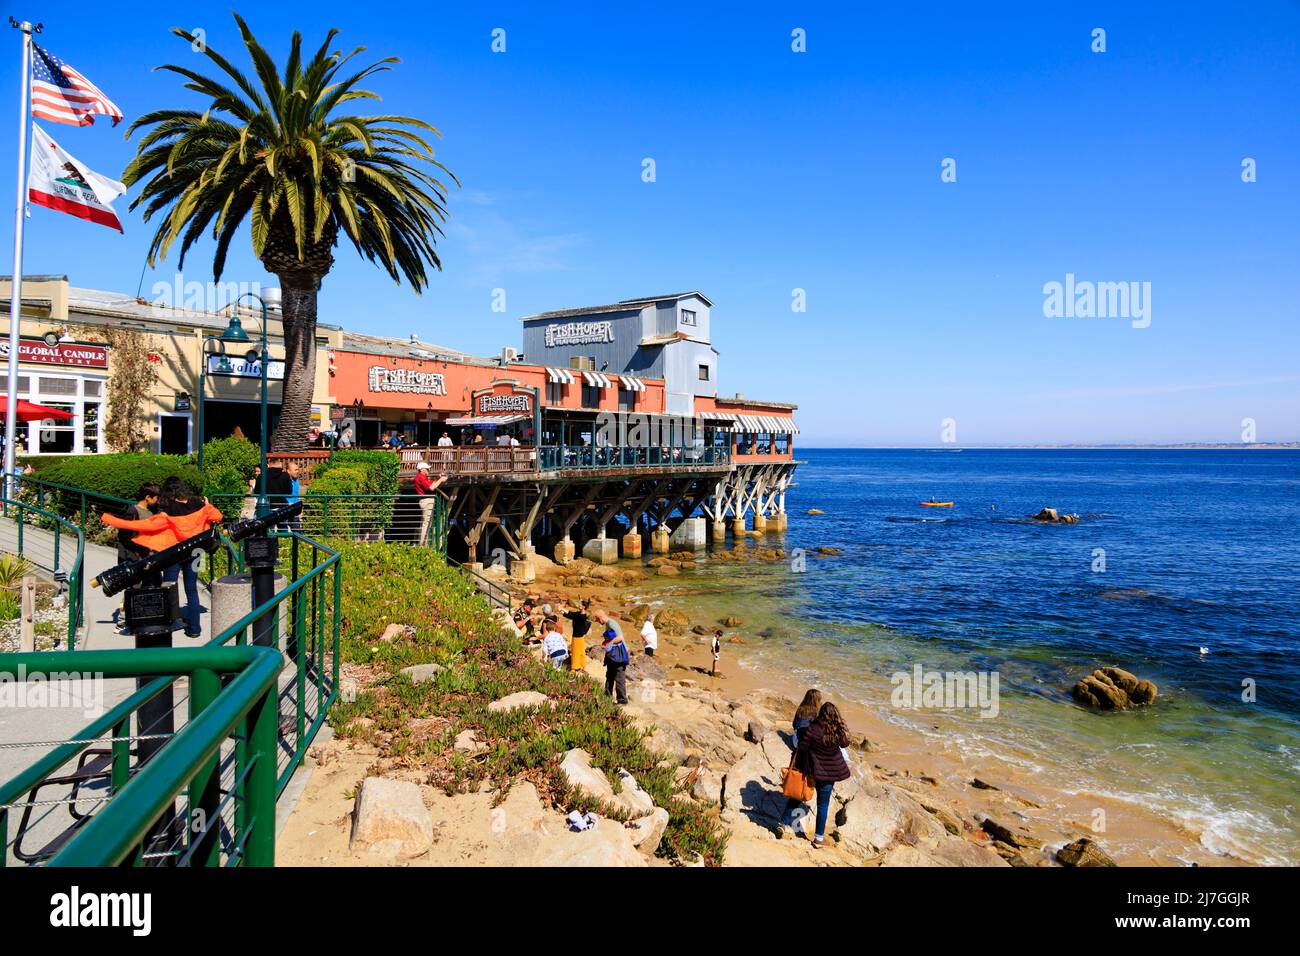 The Fish Hopper seafood and steak restaurant juts out into the Pacific Ocean on a pier. Tourists on the beach .Cannery Row, Monterey, California, USA. Stock Photo